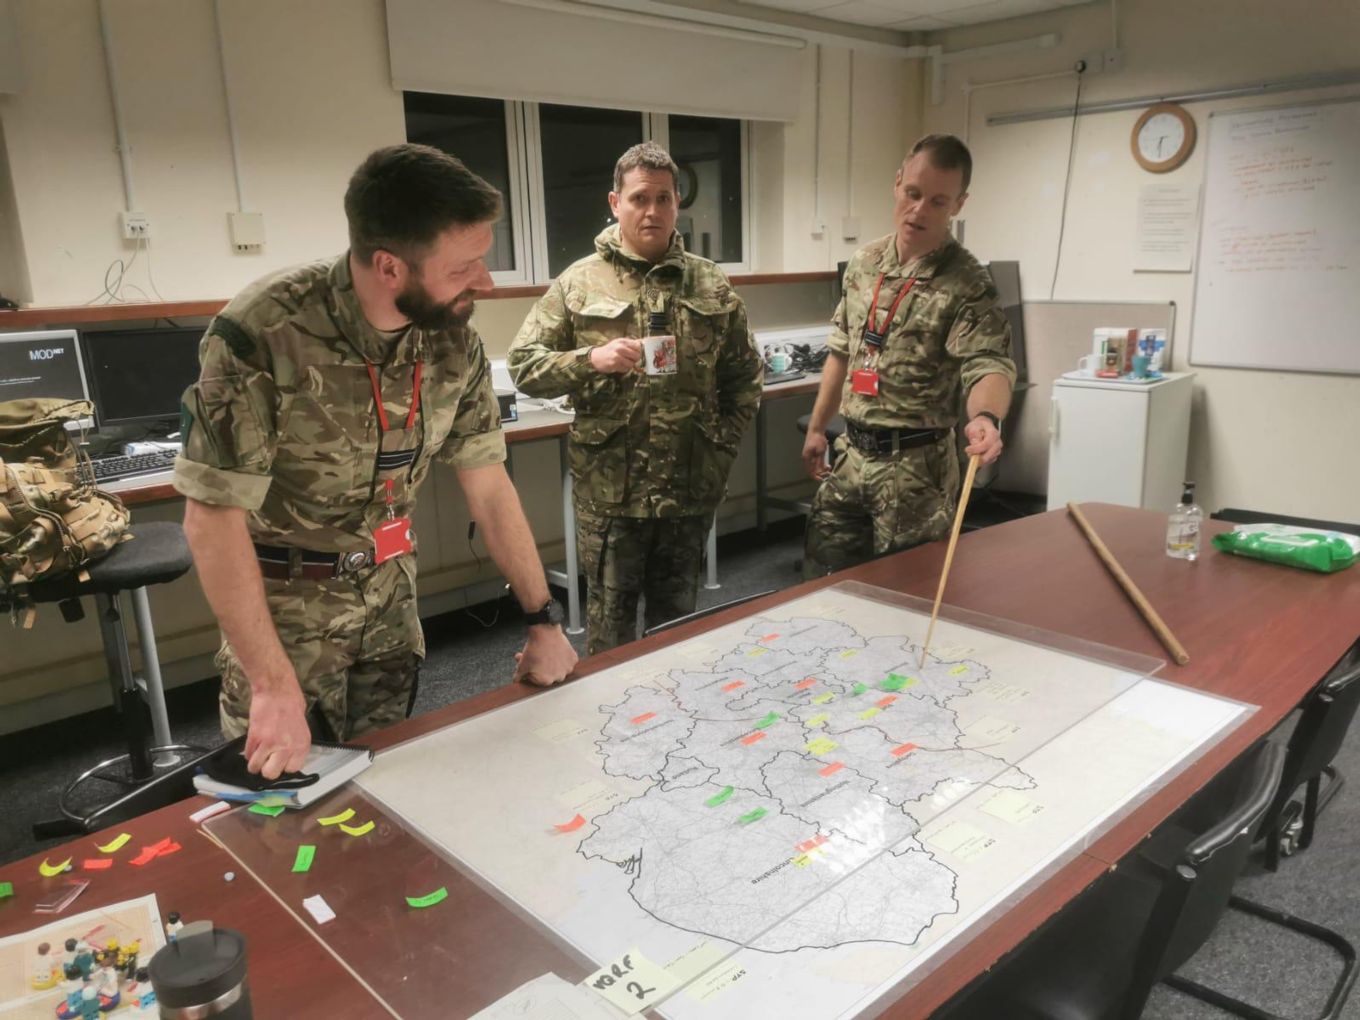 Image shows Flight Lieutenants Clarke and Coatsworth working over a map on a table.